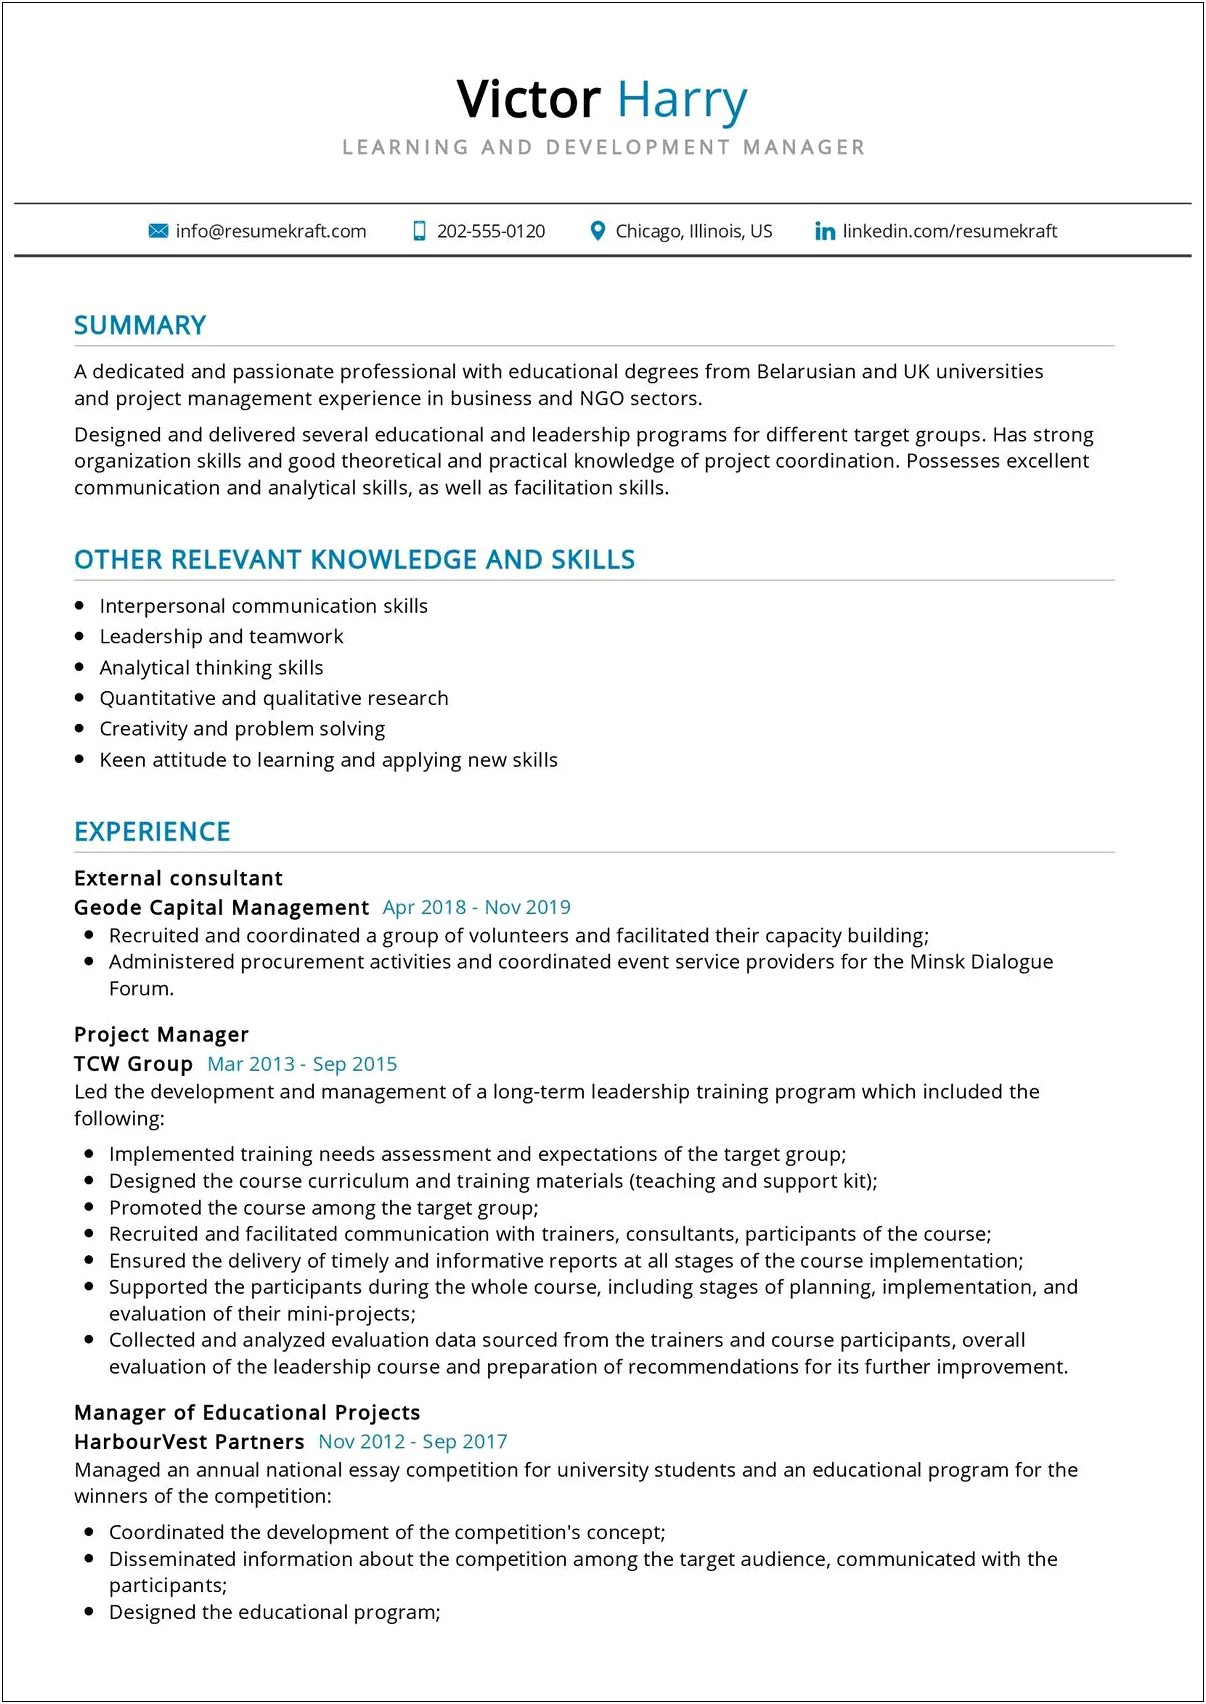 Resume Examples For Leadership And Organizational Development